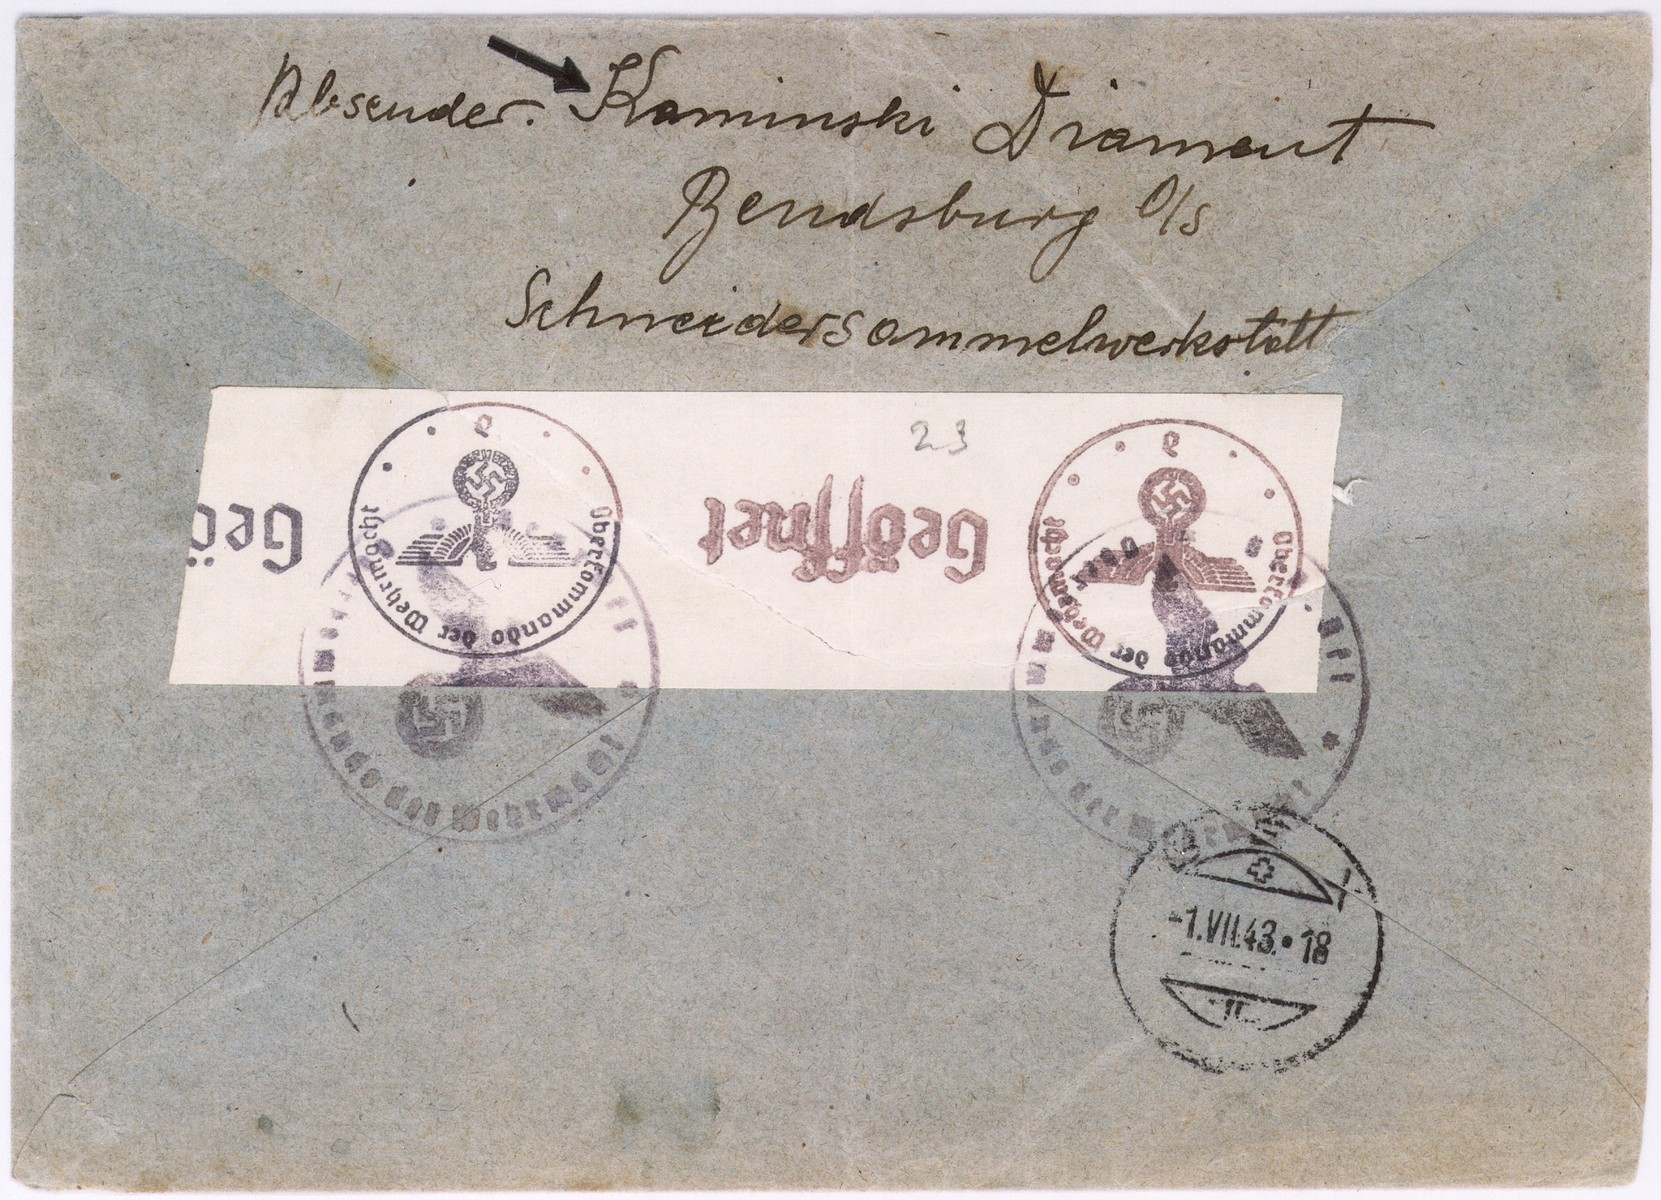 An envelope of a registered letter sent from the Bedzin ghetto by Kaminski Diamant to Alfred Schwartzbaum in Lausanne, Switzerland.  The return address of the sender or senders states: Taylors Workshop.  On the back of the envelope there is a piece of tape with the stamp of the German censor.